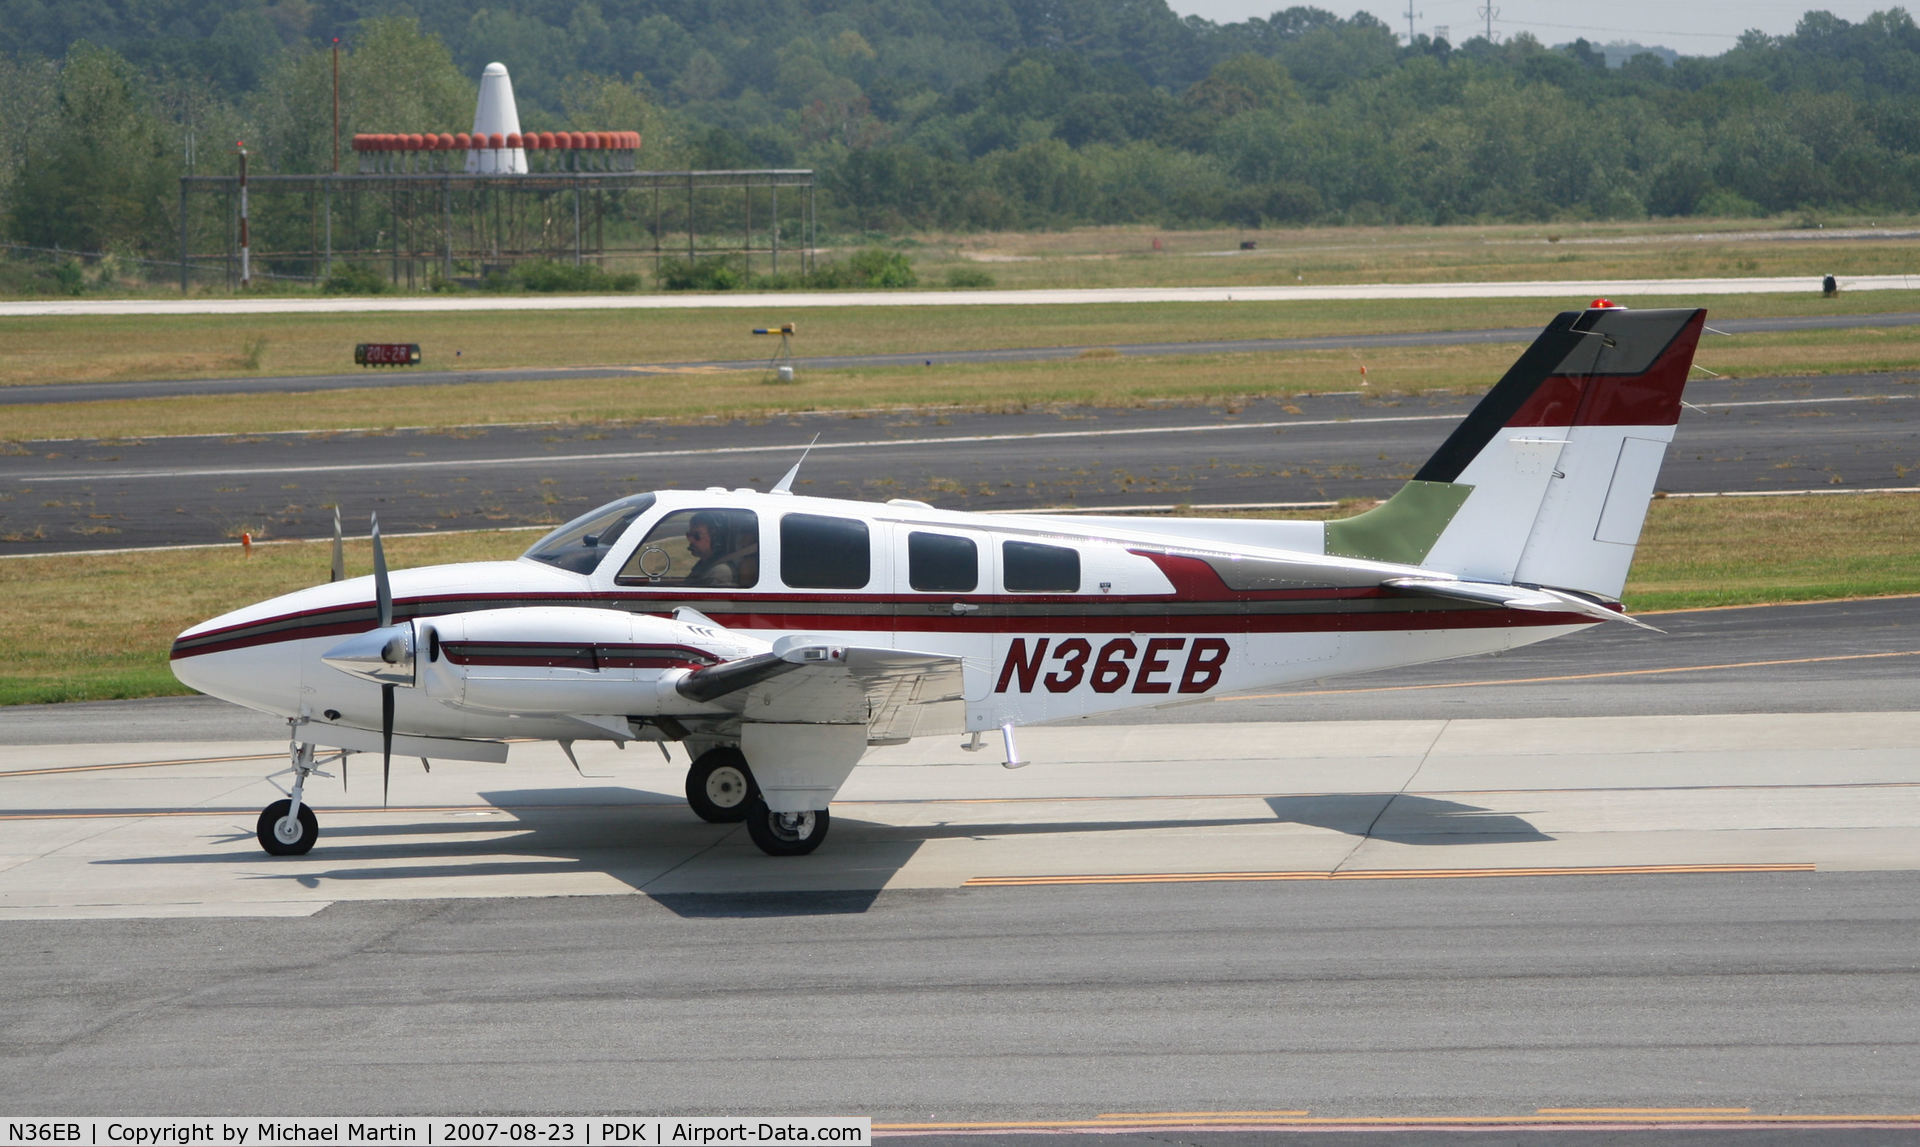 N36EB, 1984 Beech 58P Baron C/N TJ-465, Taxing to Epps Air Service